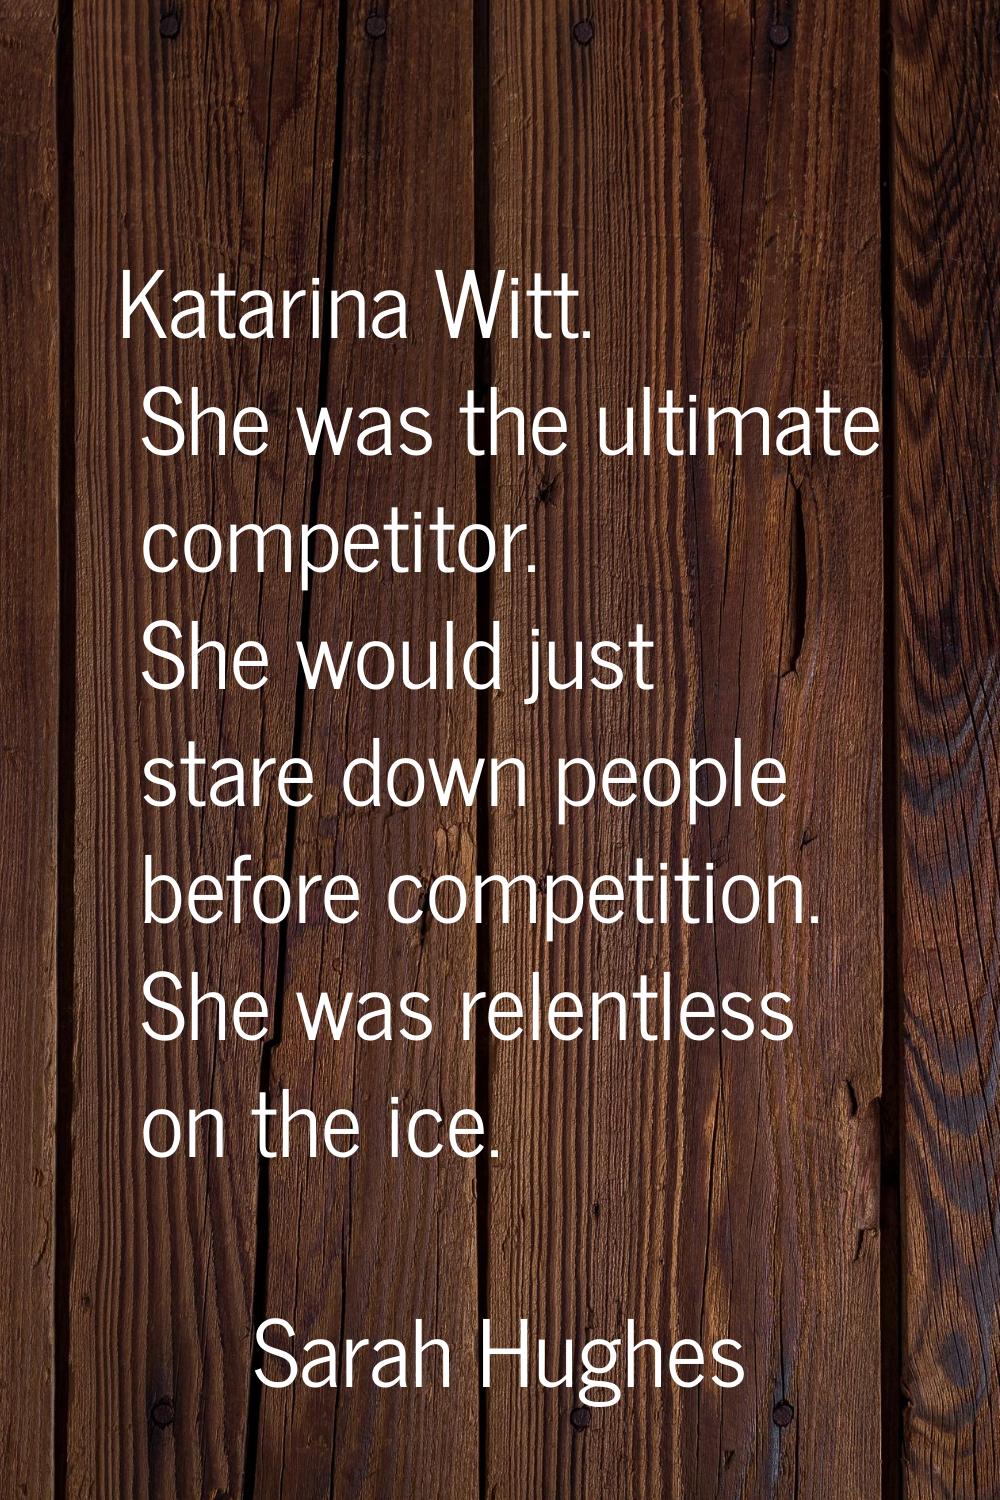 Katarina Witt. She was the ultimate competitor. She would just stare down people before competition